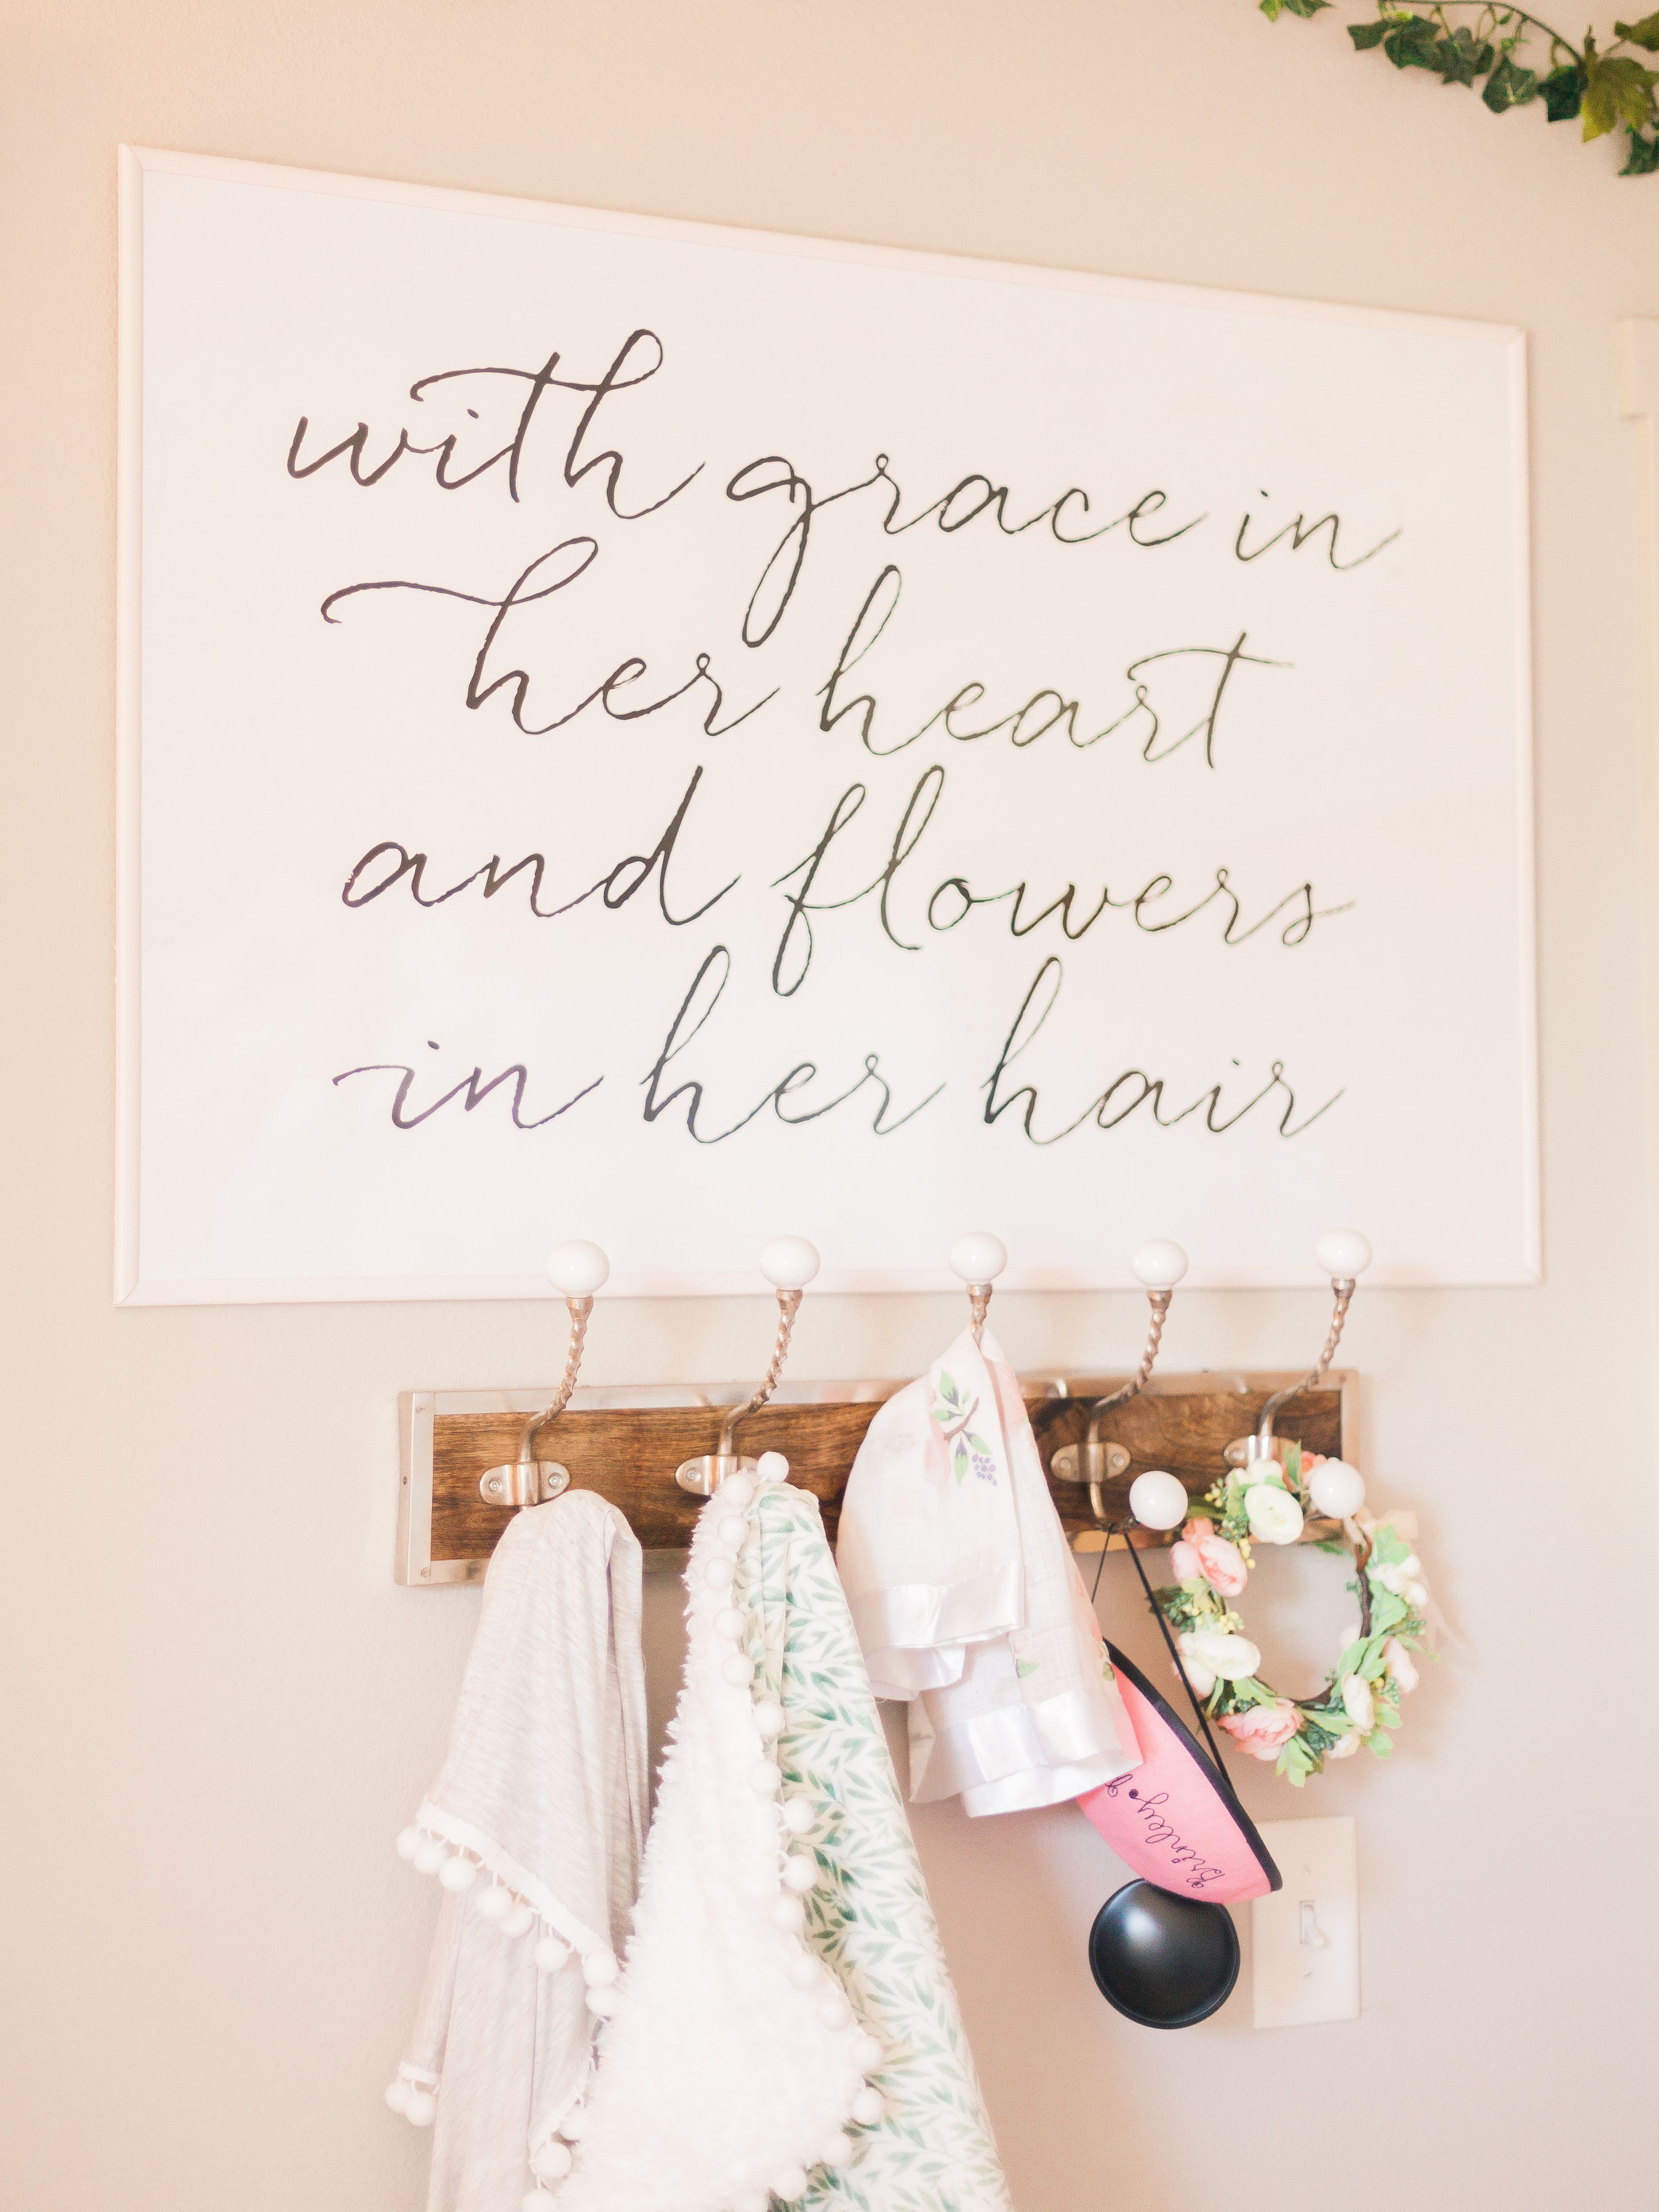 WITH GRACE IN HER HEART AND FLOWERS IN HER HAIR // Printable Wall Art by Dear Lily Mae (@dearlilymae) on Instagram // Nursery